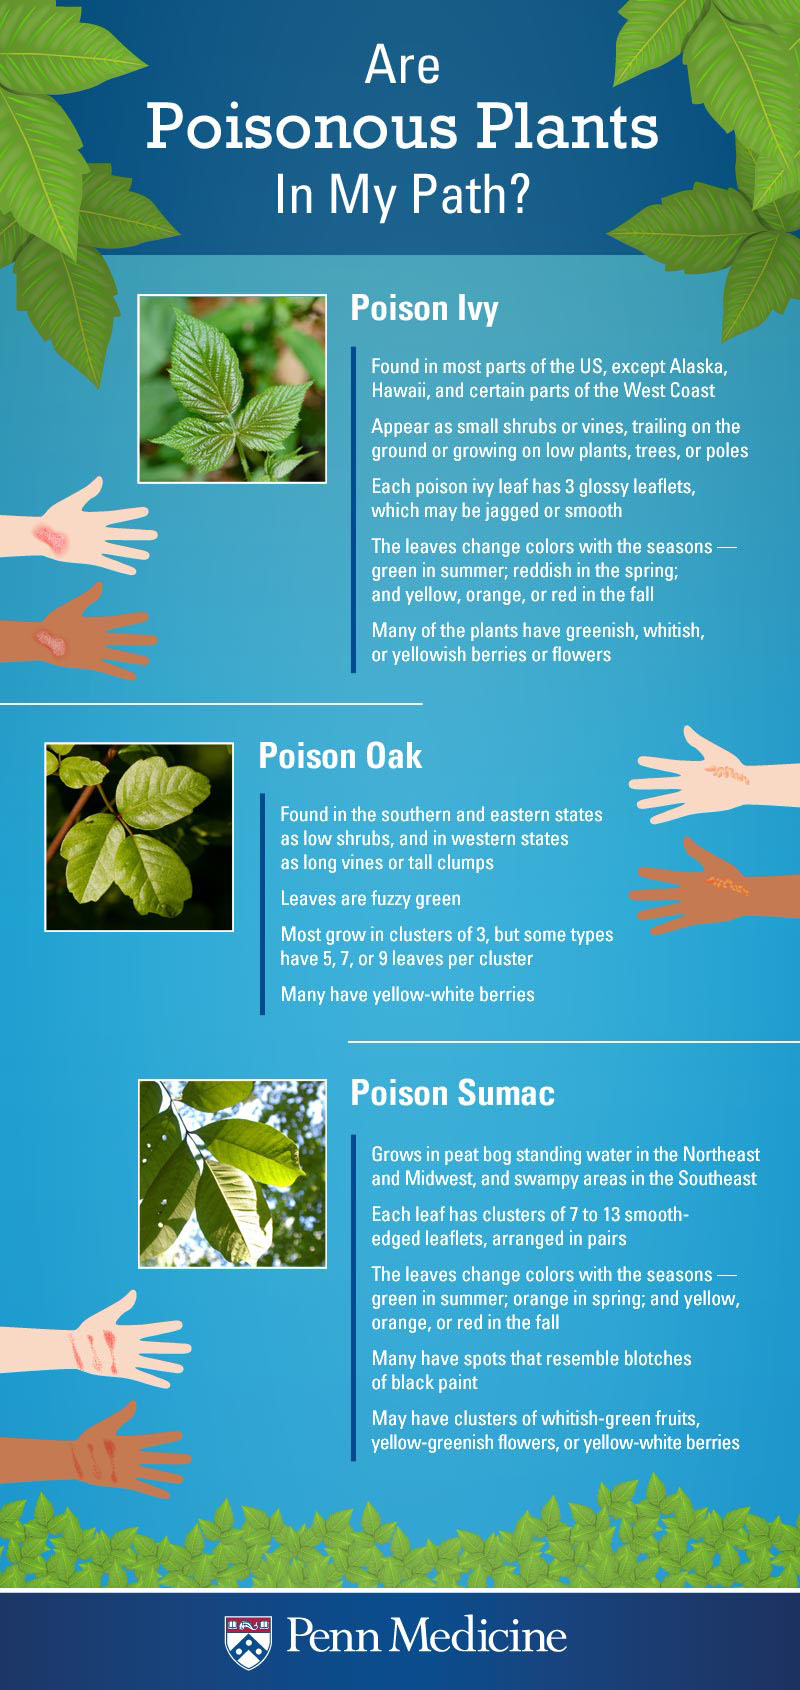 infographic_showing_poison ivy_poison oak_and_poison sumac_explains_what_they_look_like_where_they_are